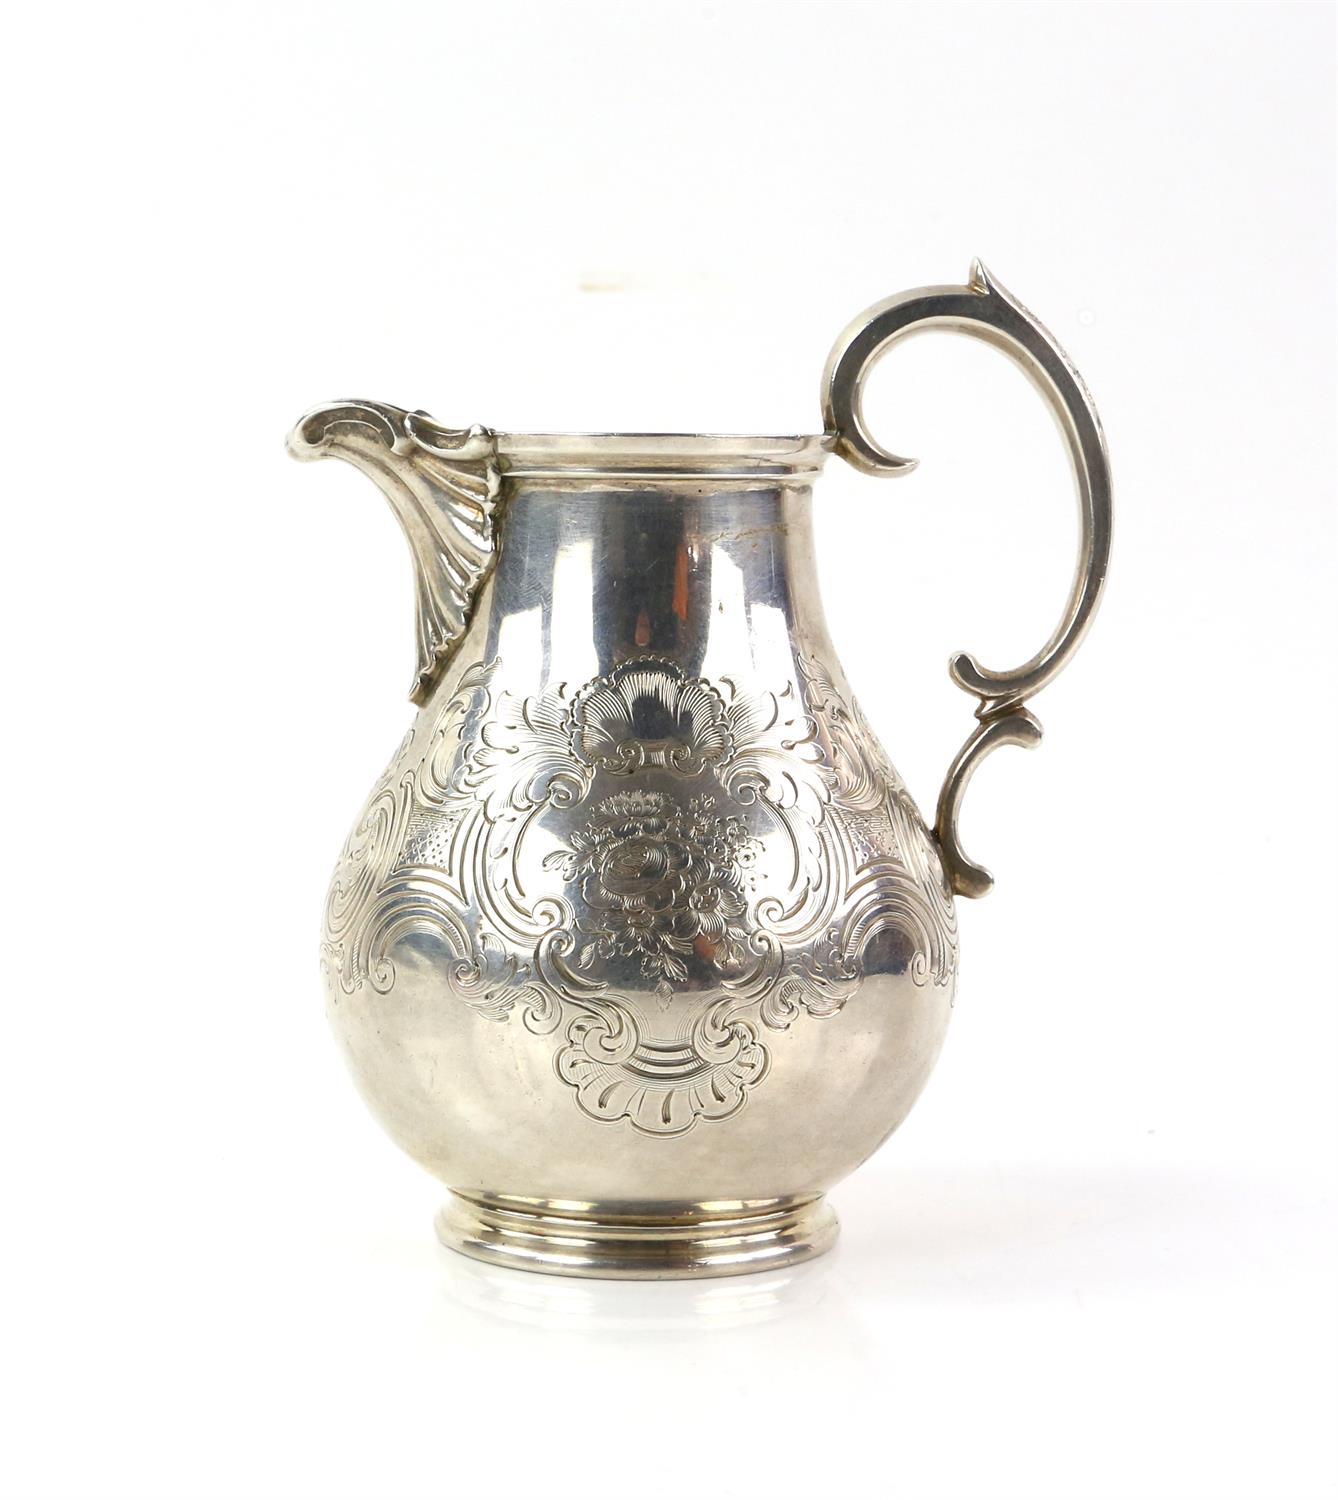 Ornate spouted 19th Century silver milk jug by Edward, Edward John and William Barnard, London 1840 - Image 3 of 6